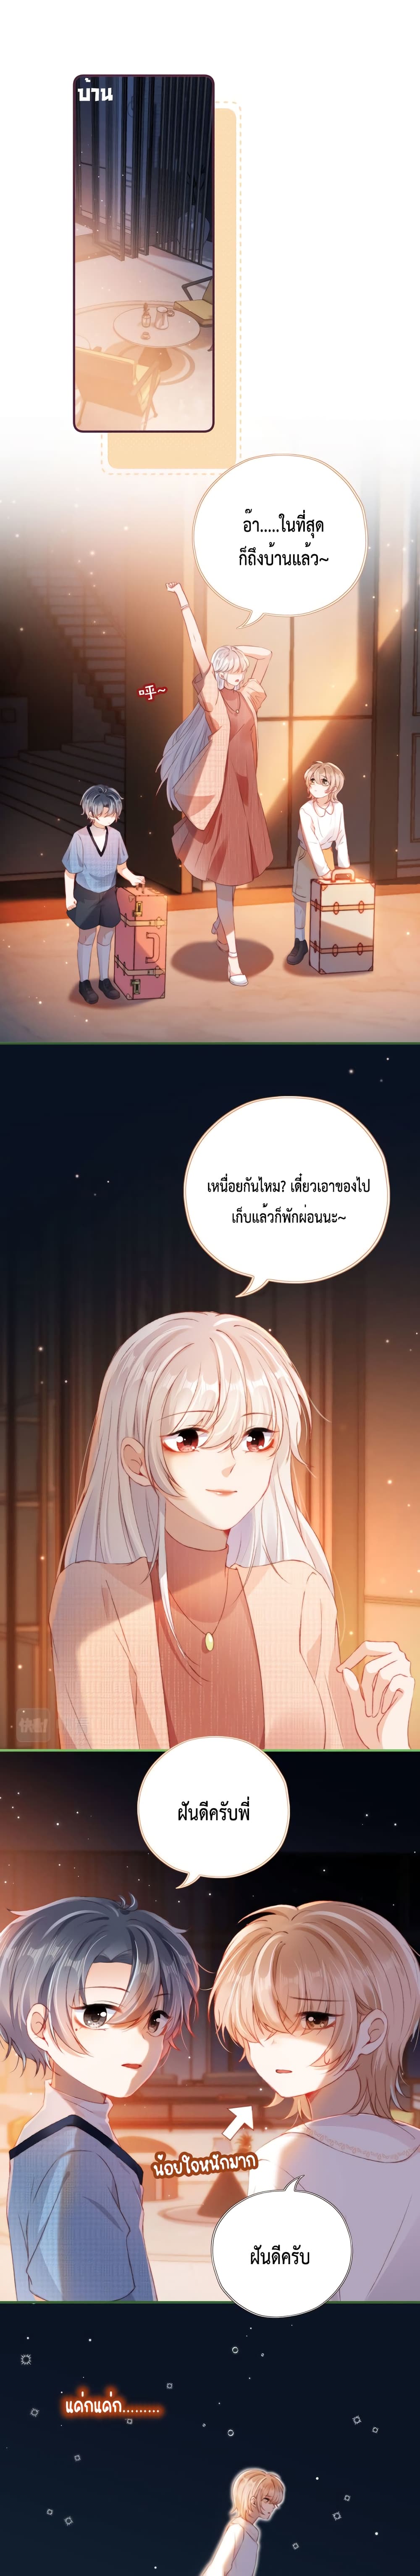 Who are you - หน้า 2